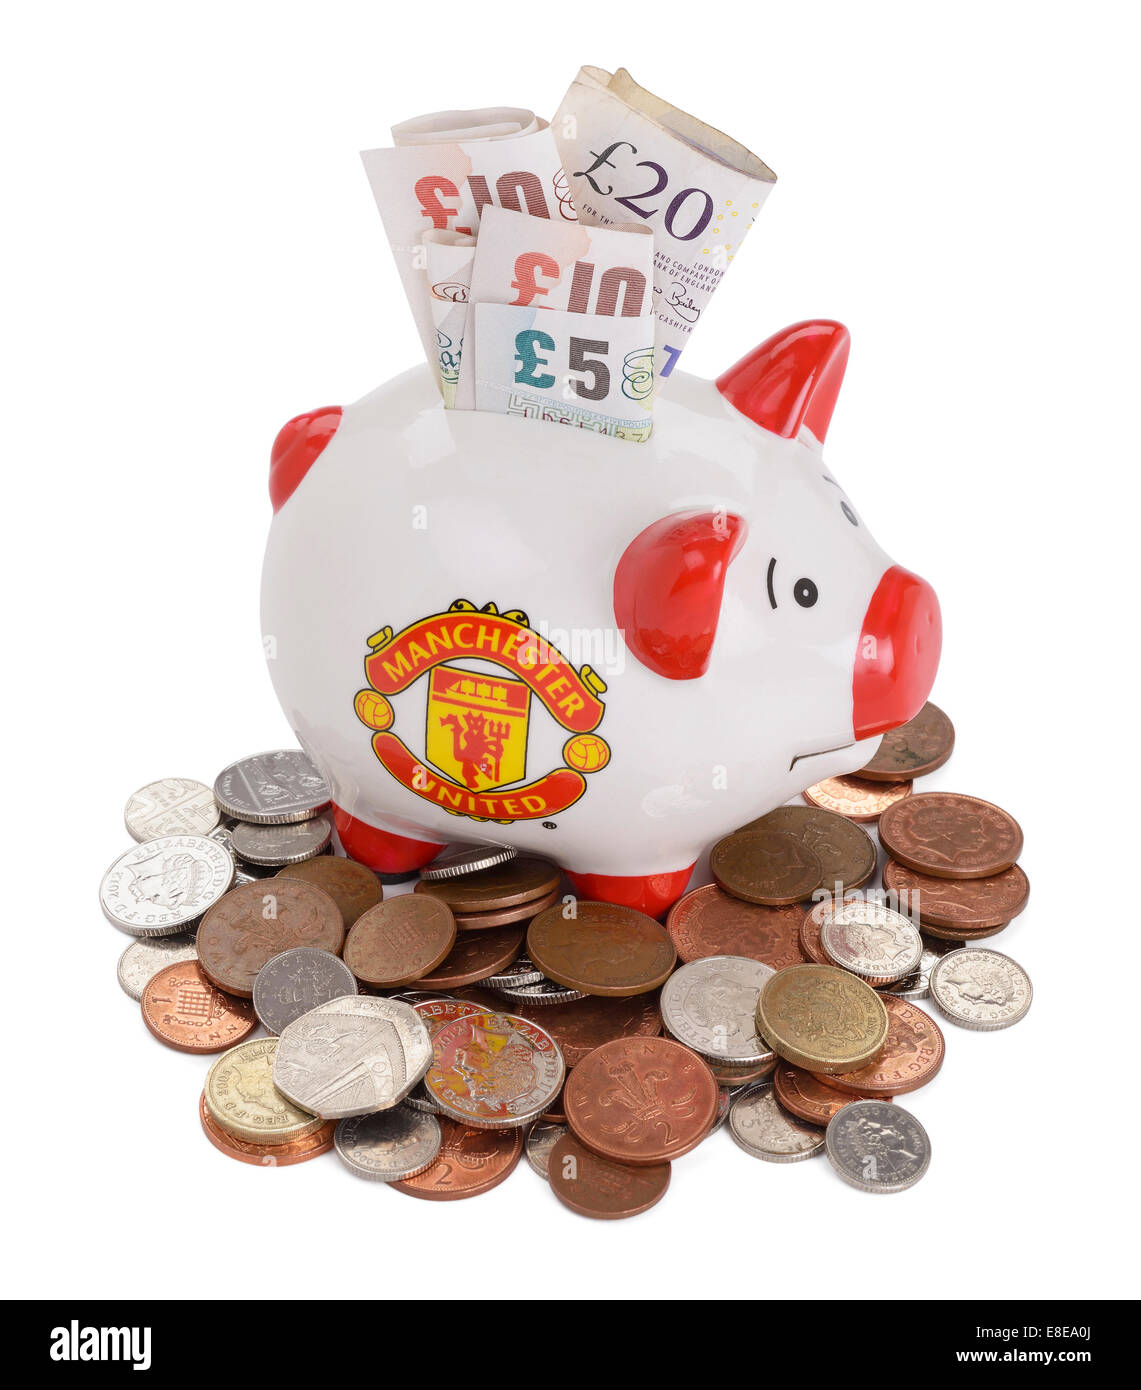 Manchester United Football Club piggy bank Banque D'Images